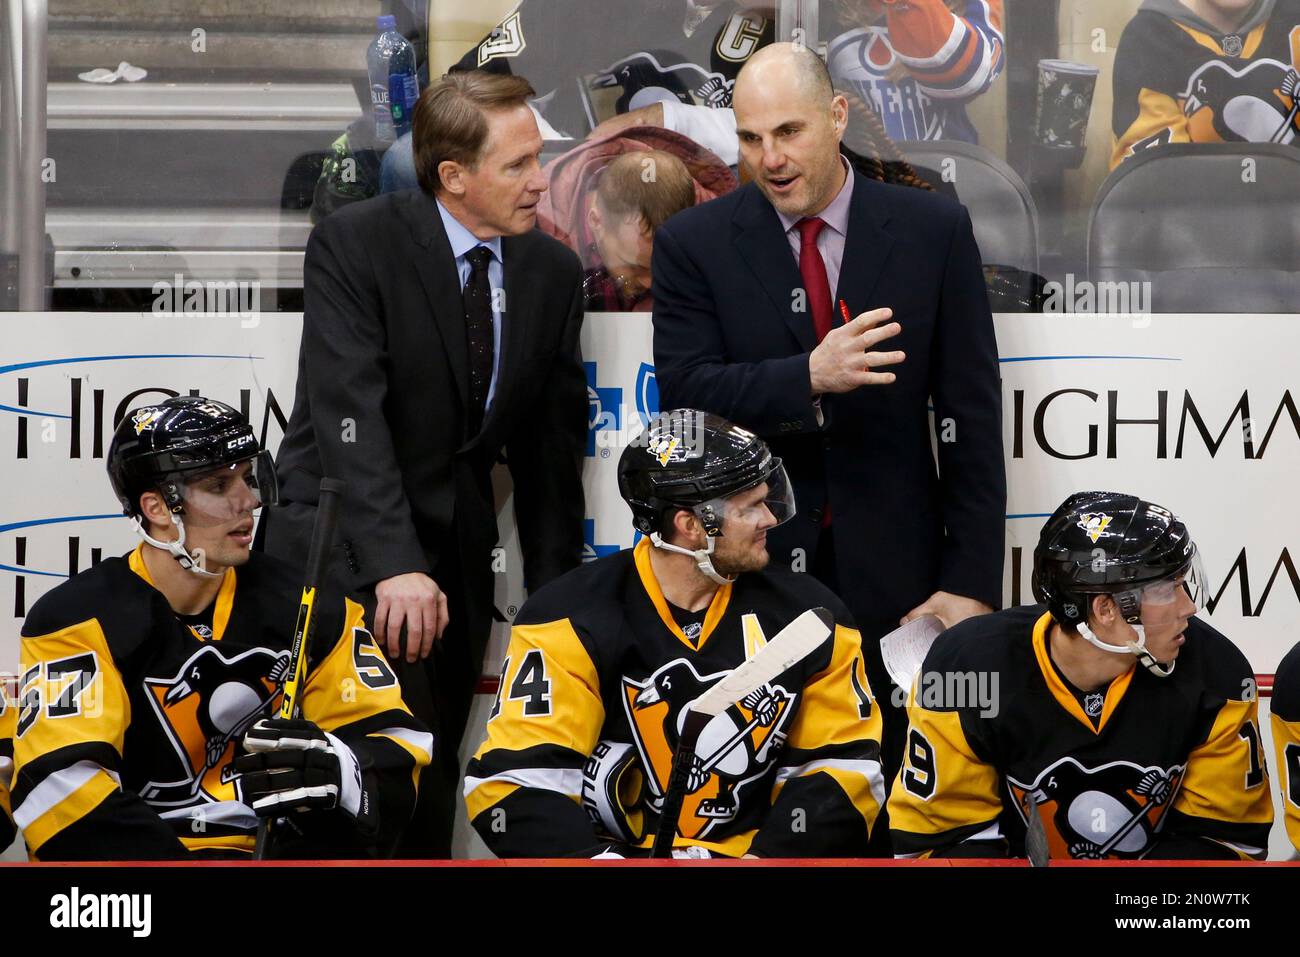 Pittsburgh Penguins - Penguins alumnus, Rick Tocchet, has been named the  Assistant Coach of the Pens. Head Coach Mike Johnston will look to add one  more assistant coach to his staff. Full